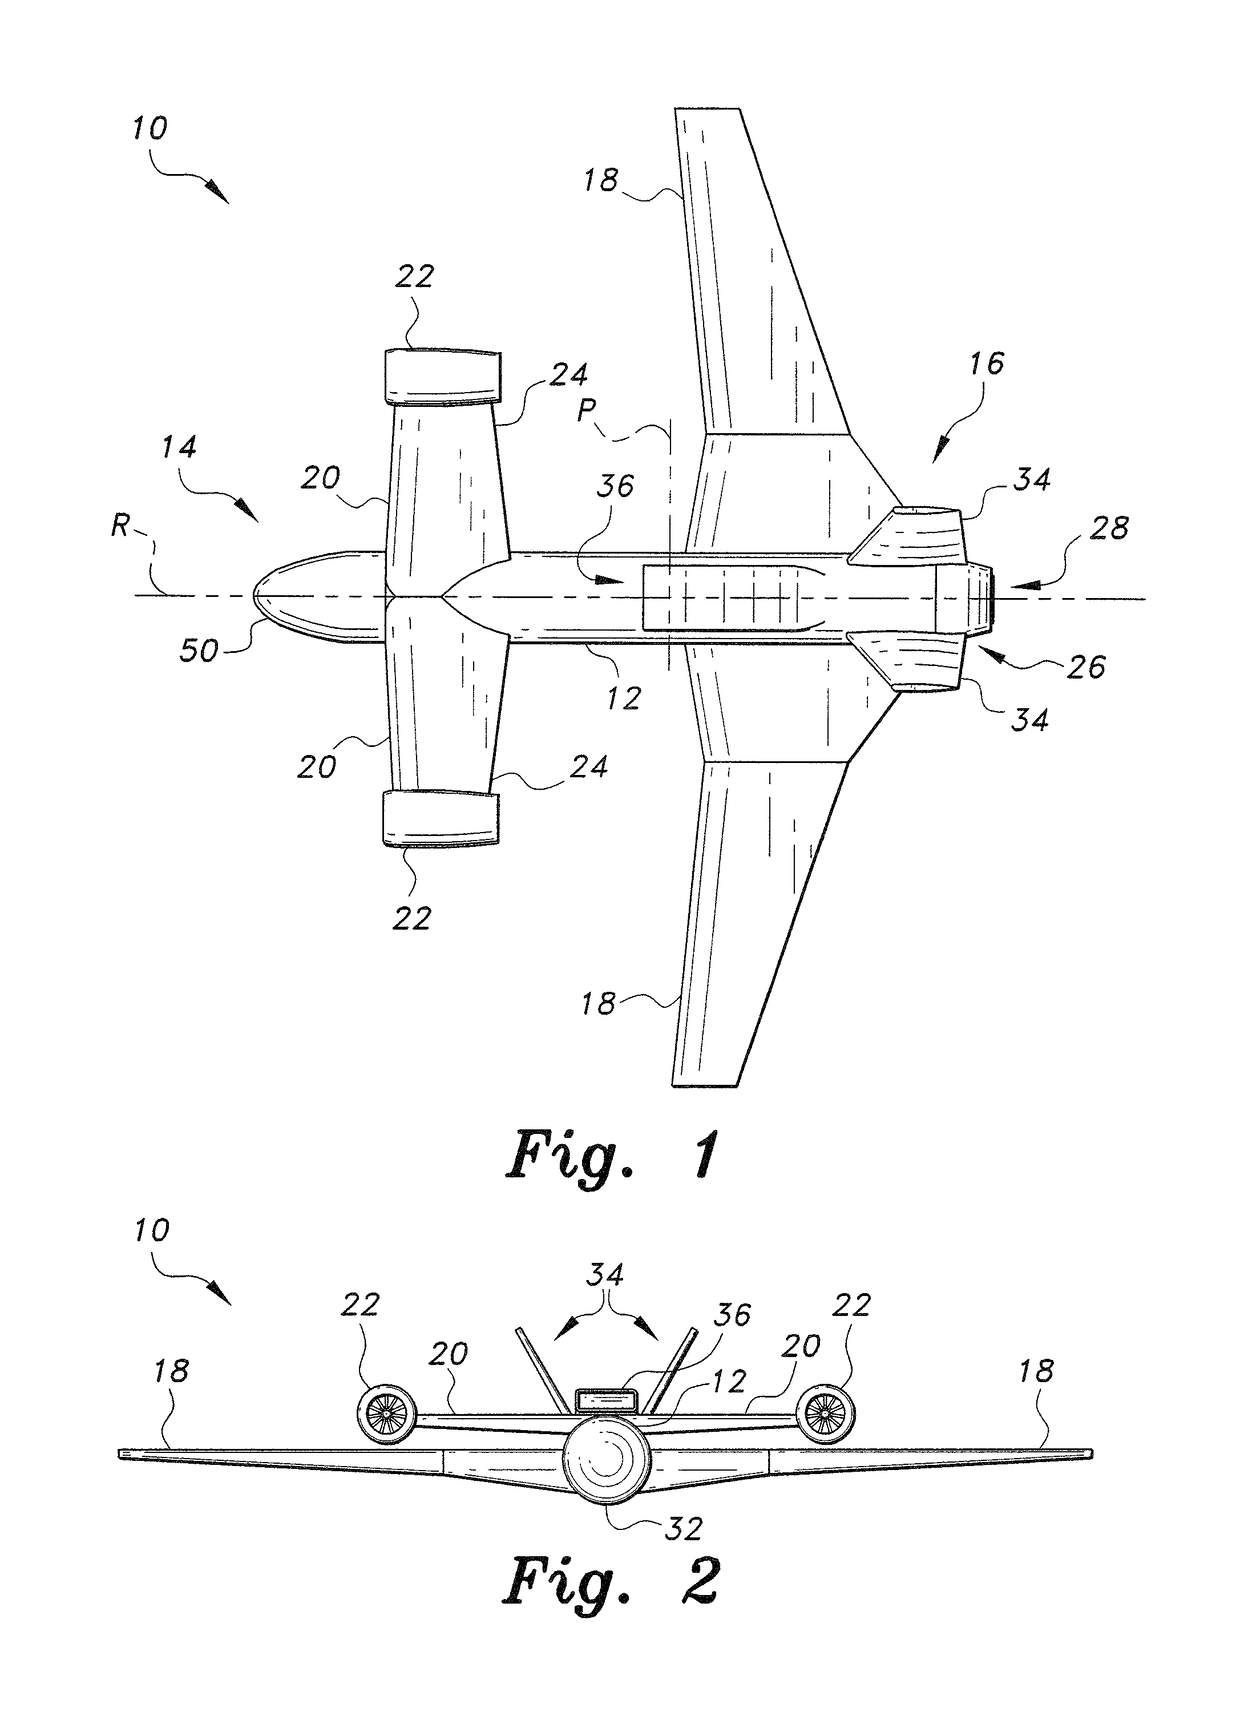 Vertical takeoff and landing unmanned aerial vehicle